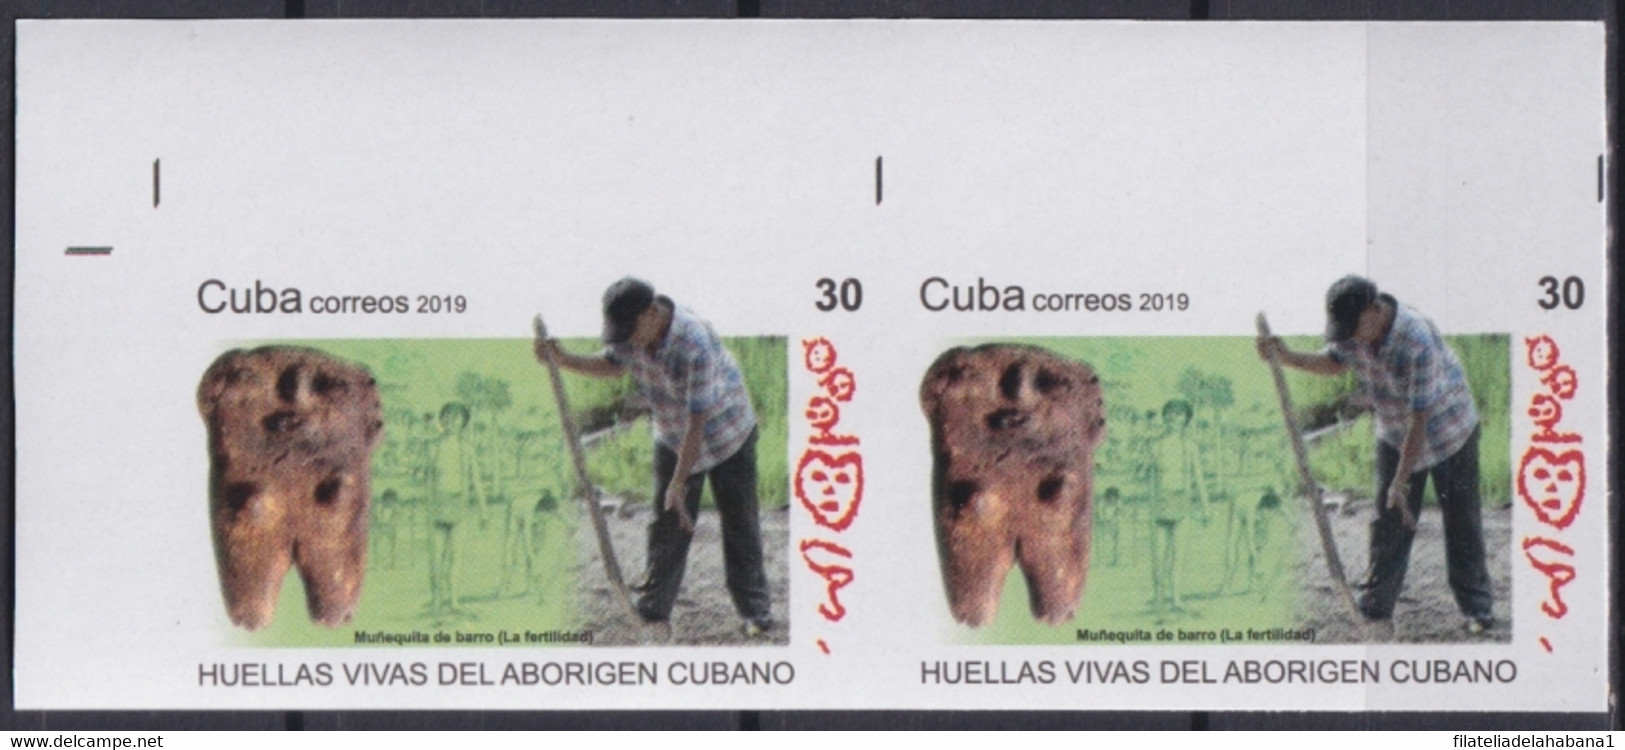 2019.222 CUBA MNH 2019 IMPERFORATED PROOF 30c INDIAN ARCHEOLOGY HUELLAS ABORIGEN. - Imperforates, Proofs & Errors